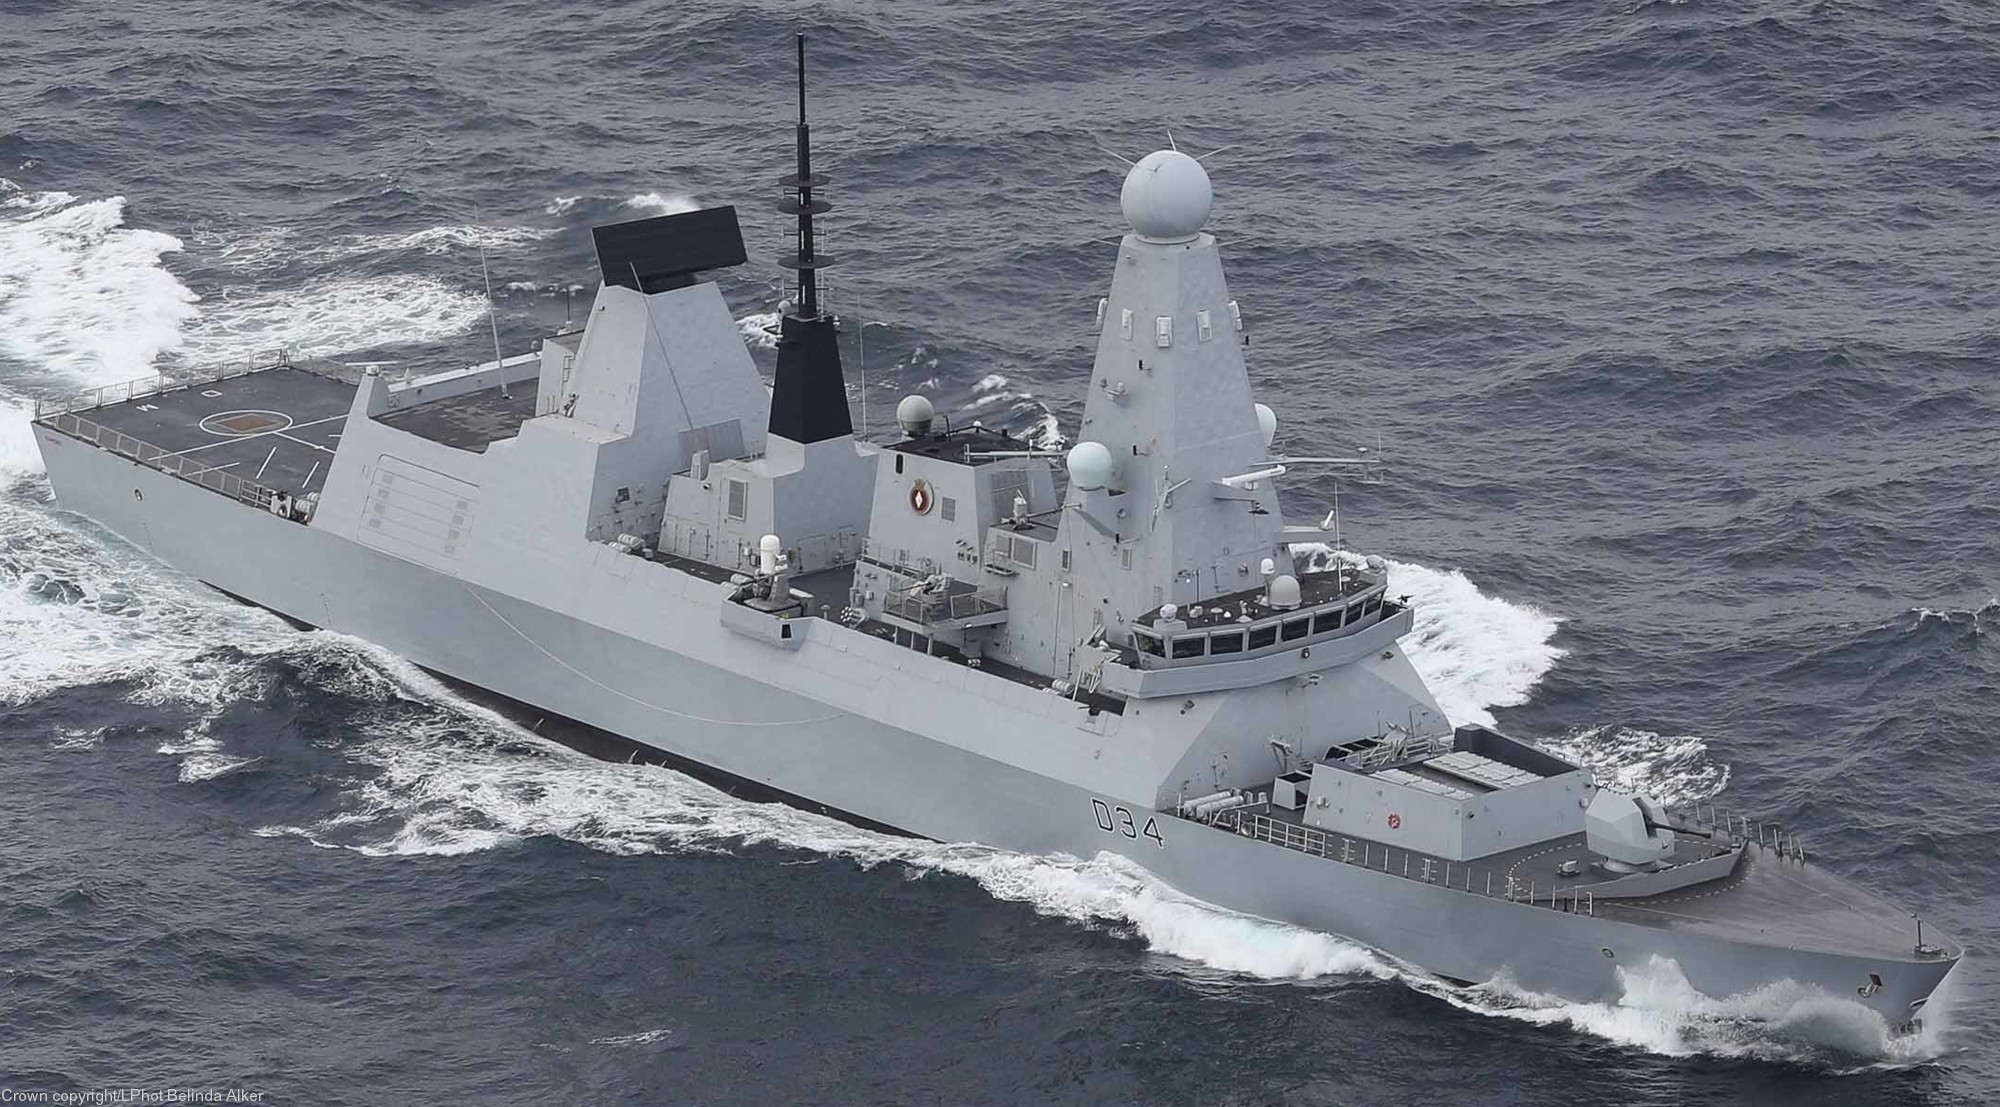 d34 hms diamond d-34 type 45 daring class guided missile destroyer ddg royal navy sea viper paams 45